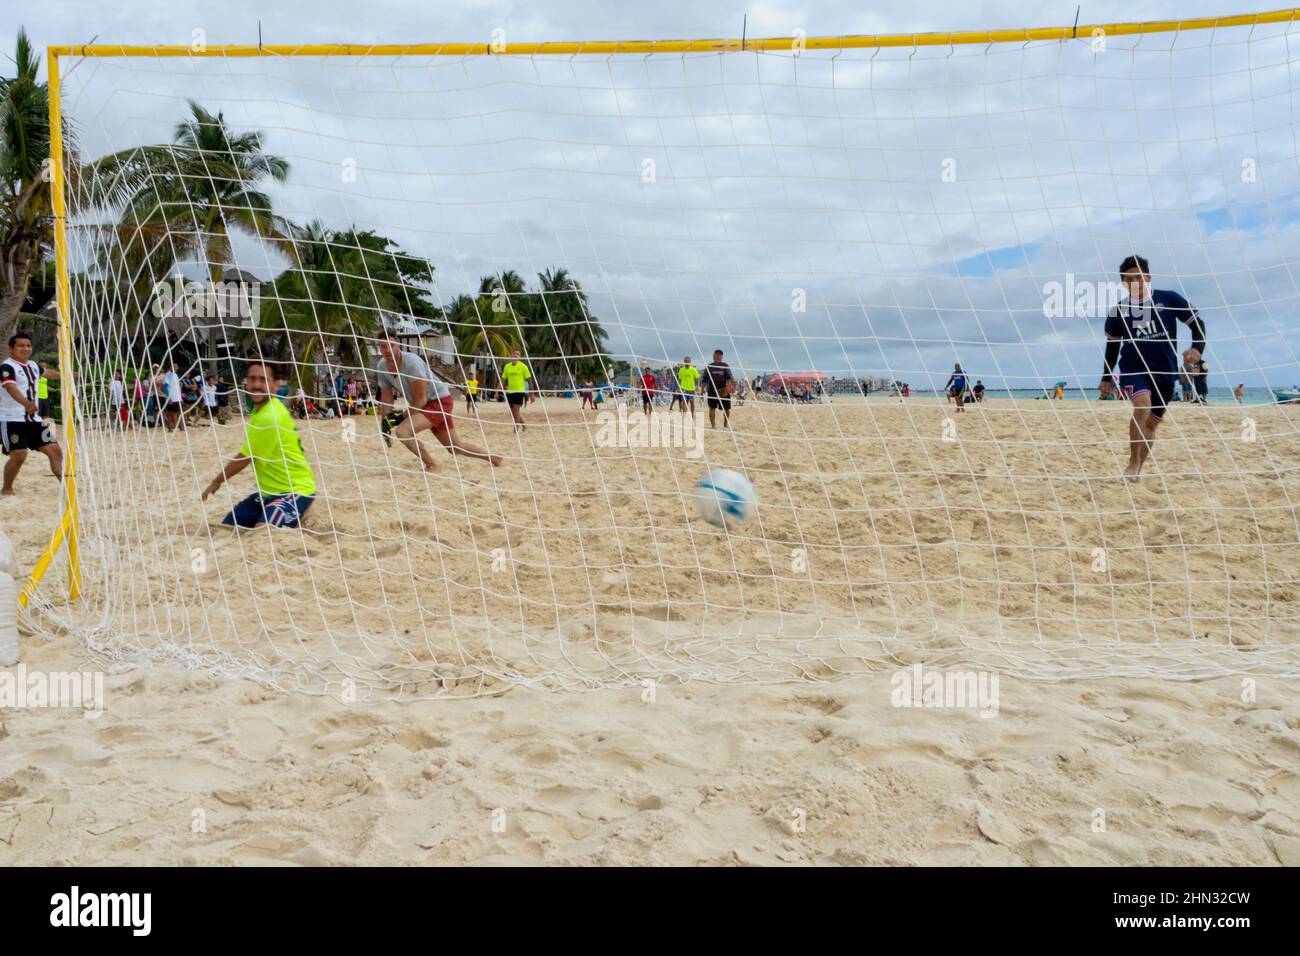 A soccer match on the beach in front of the Caribbean Sea in Playa del Carmen, Mexico. Goal. Stock Photo